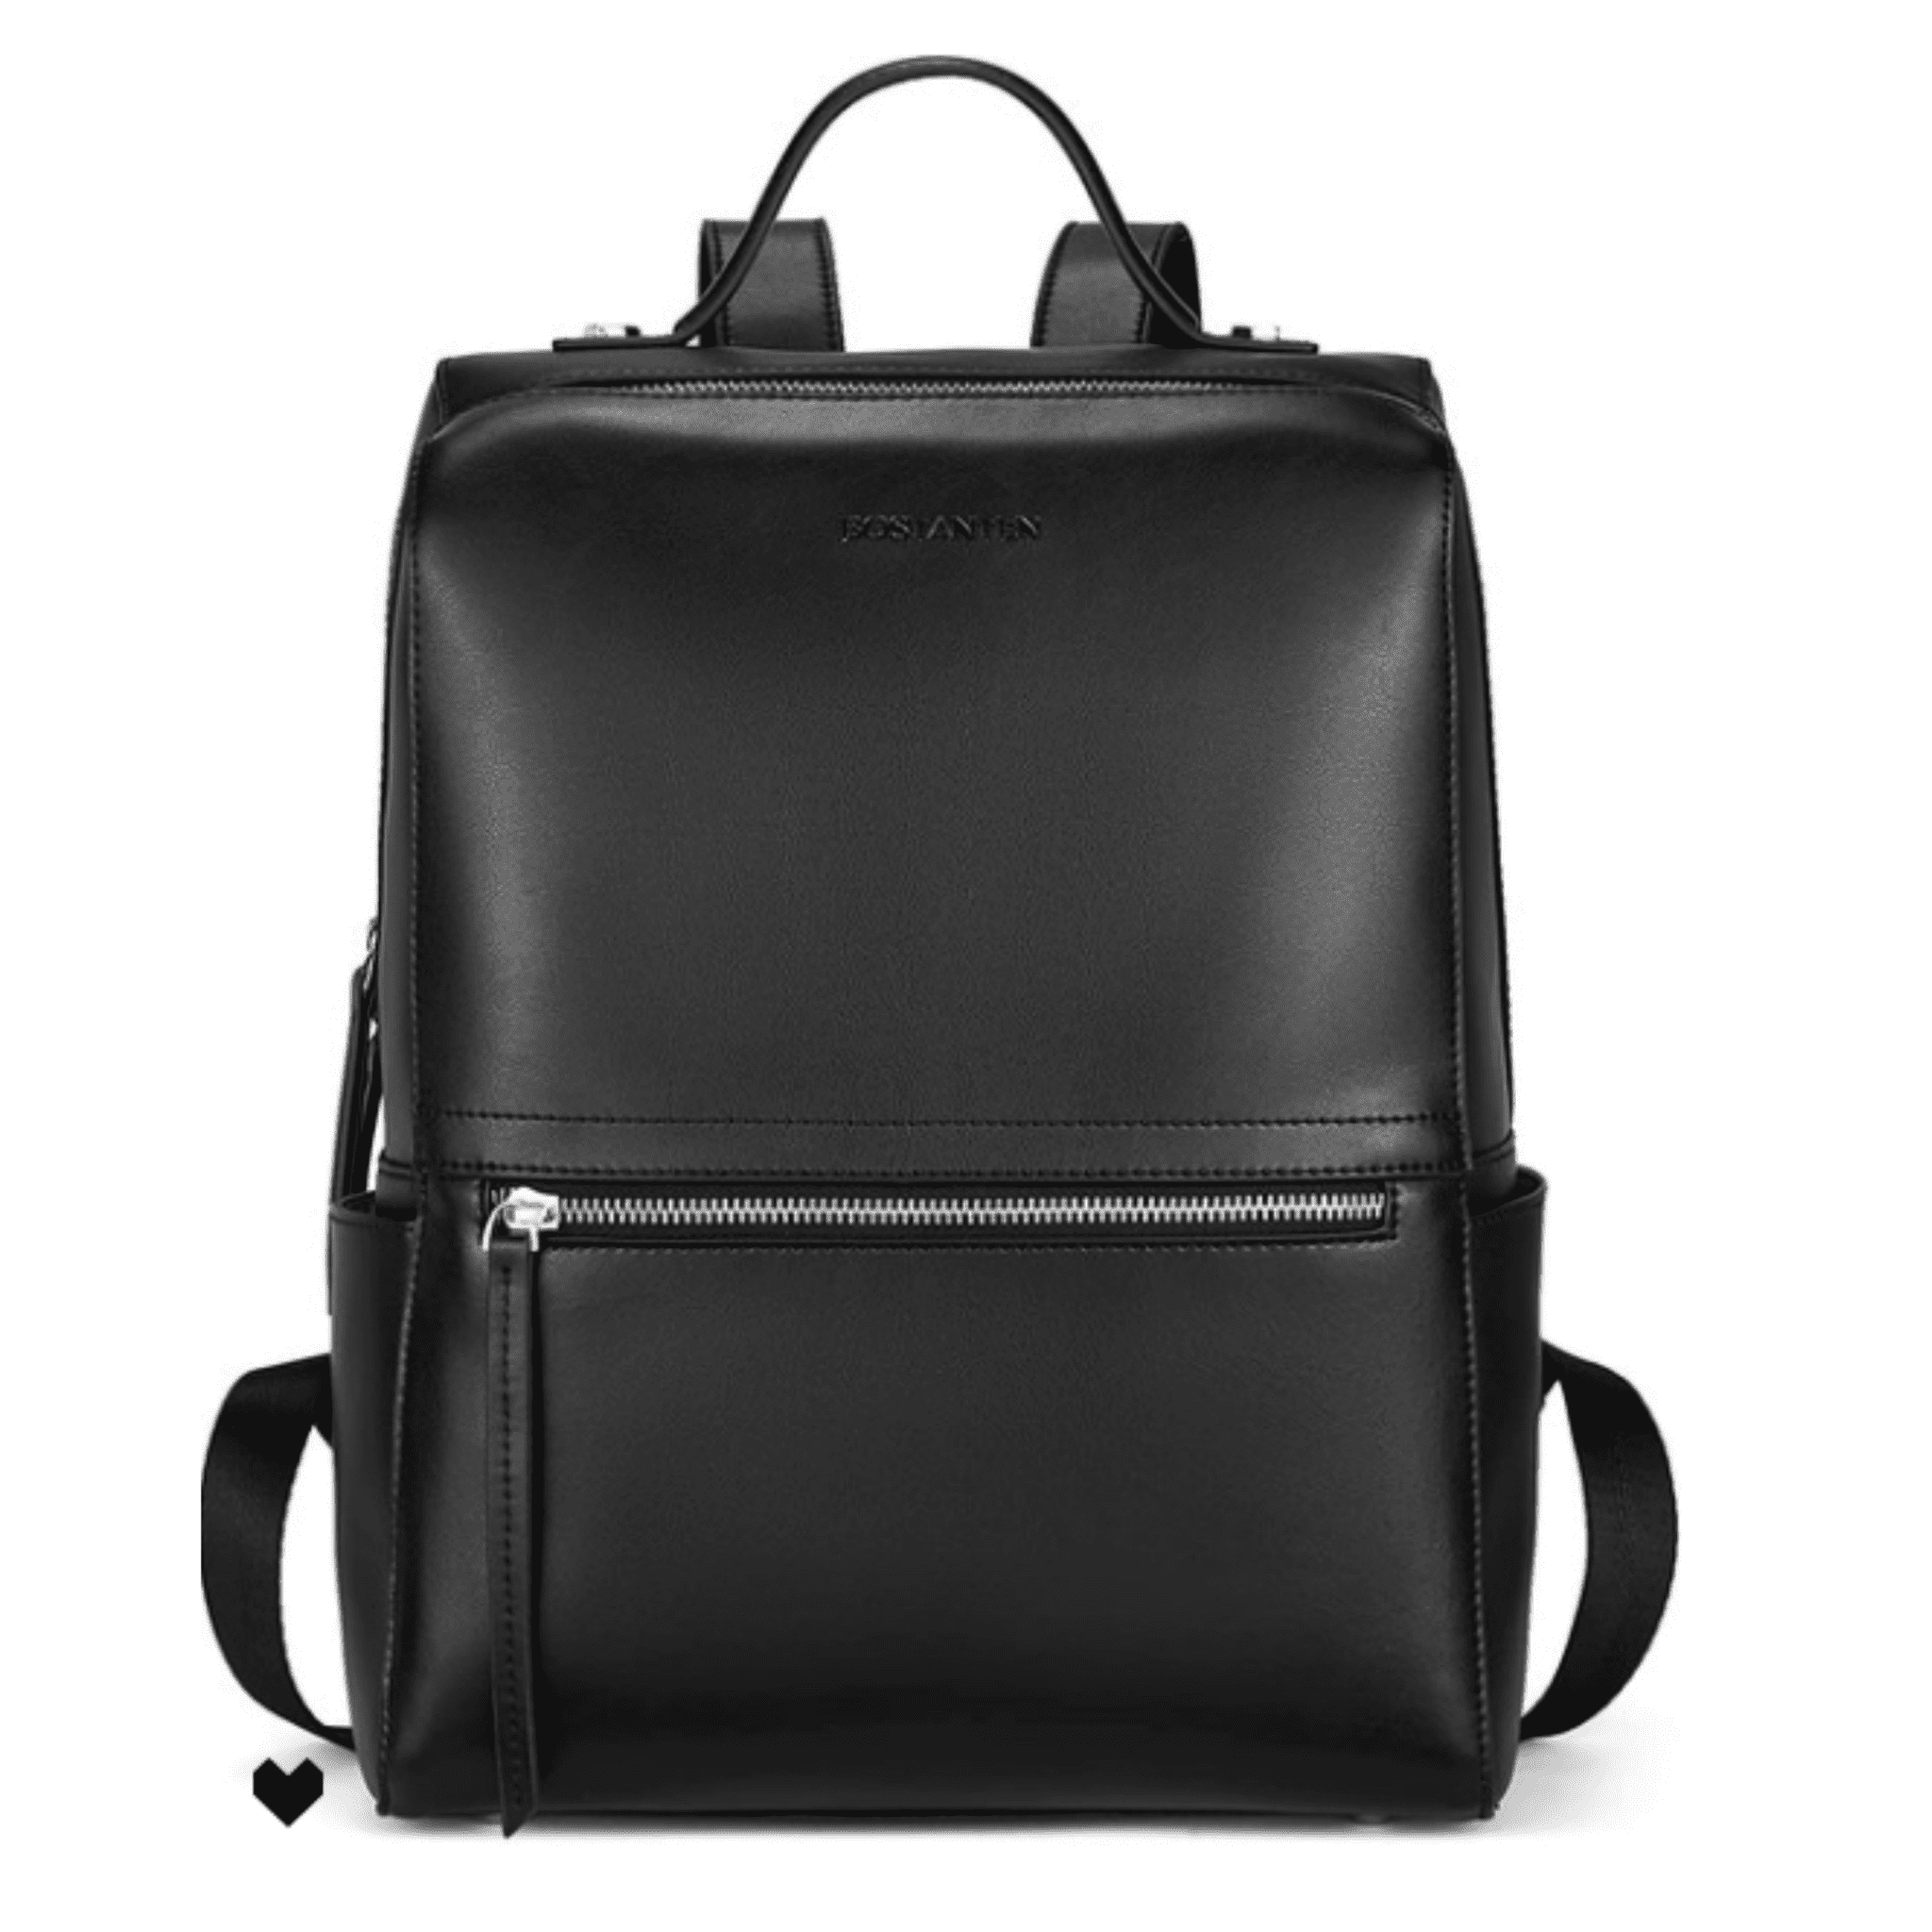 Modern Black Backpack with silver metal.